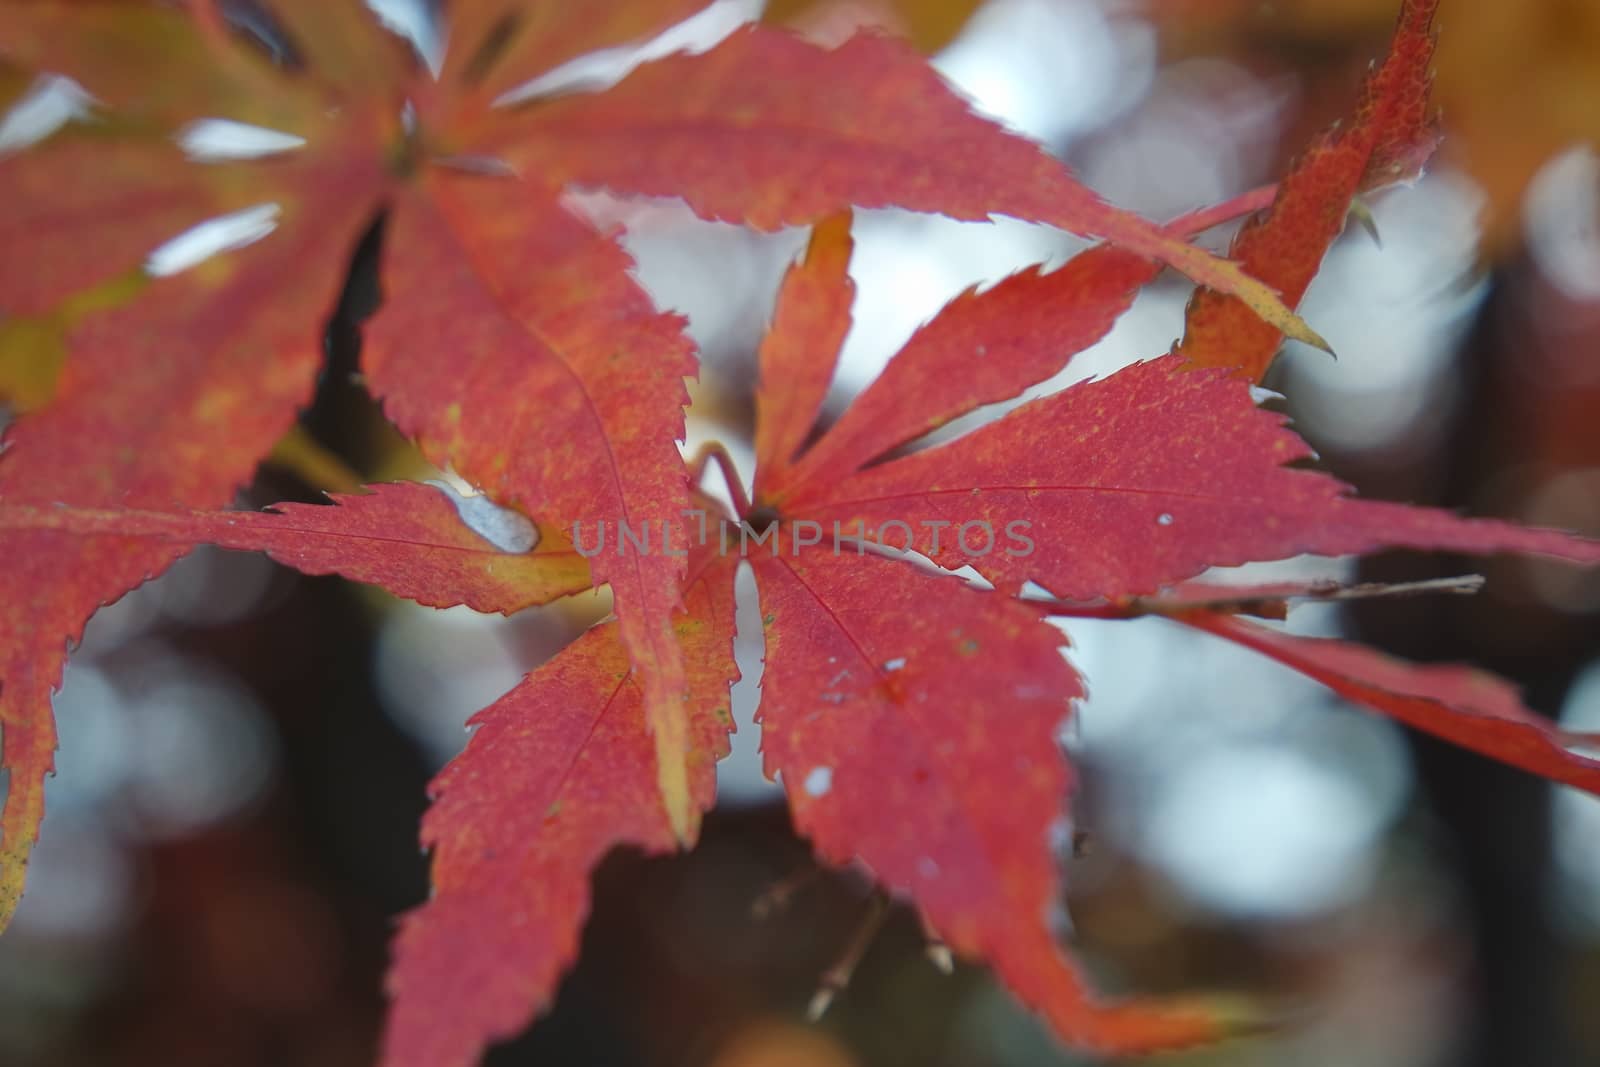 Closeup view of colorful vibrant leaves in fall season during autumn. Ivy in autumn with red and green leaves hanging from trees with twigs and branches